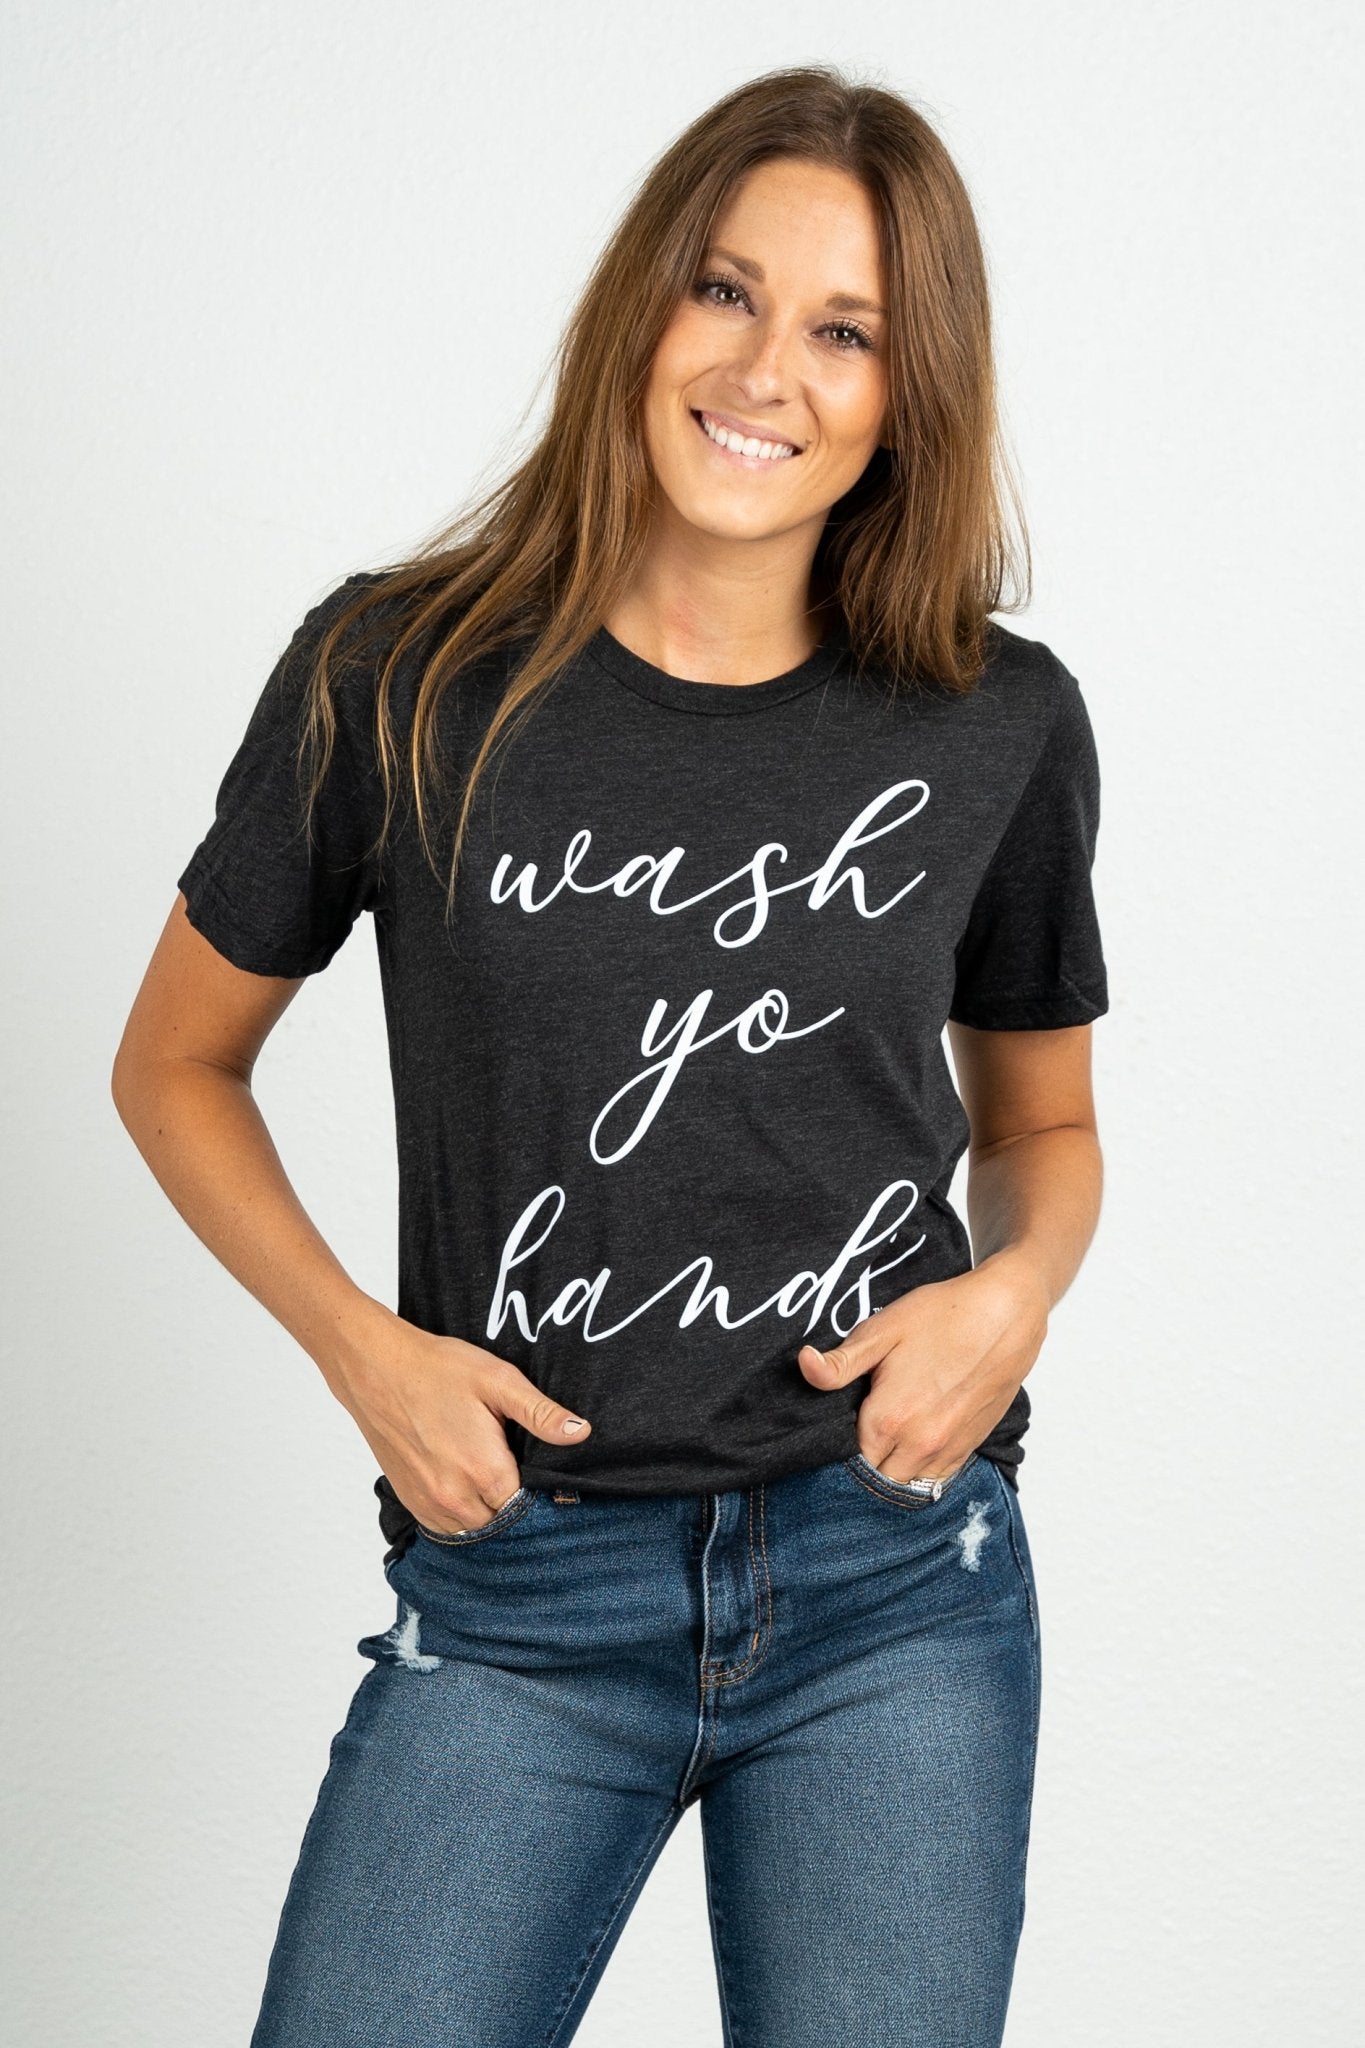 Wash yo hands unisex short sleeve t-shirt charcoal - Stylish T-shirts - Trendy Graphic T-Shirts and Tank Tops at Lush Fashion Lounge Boutique in Oklahoma City